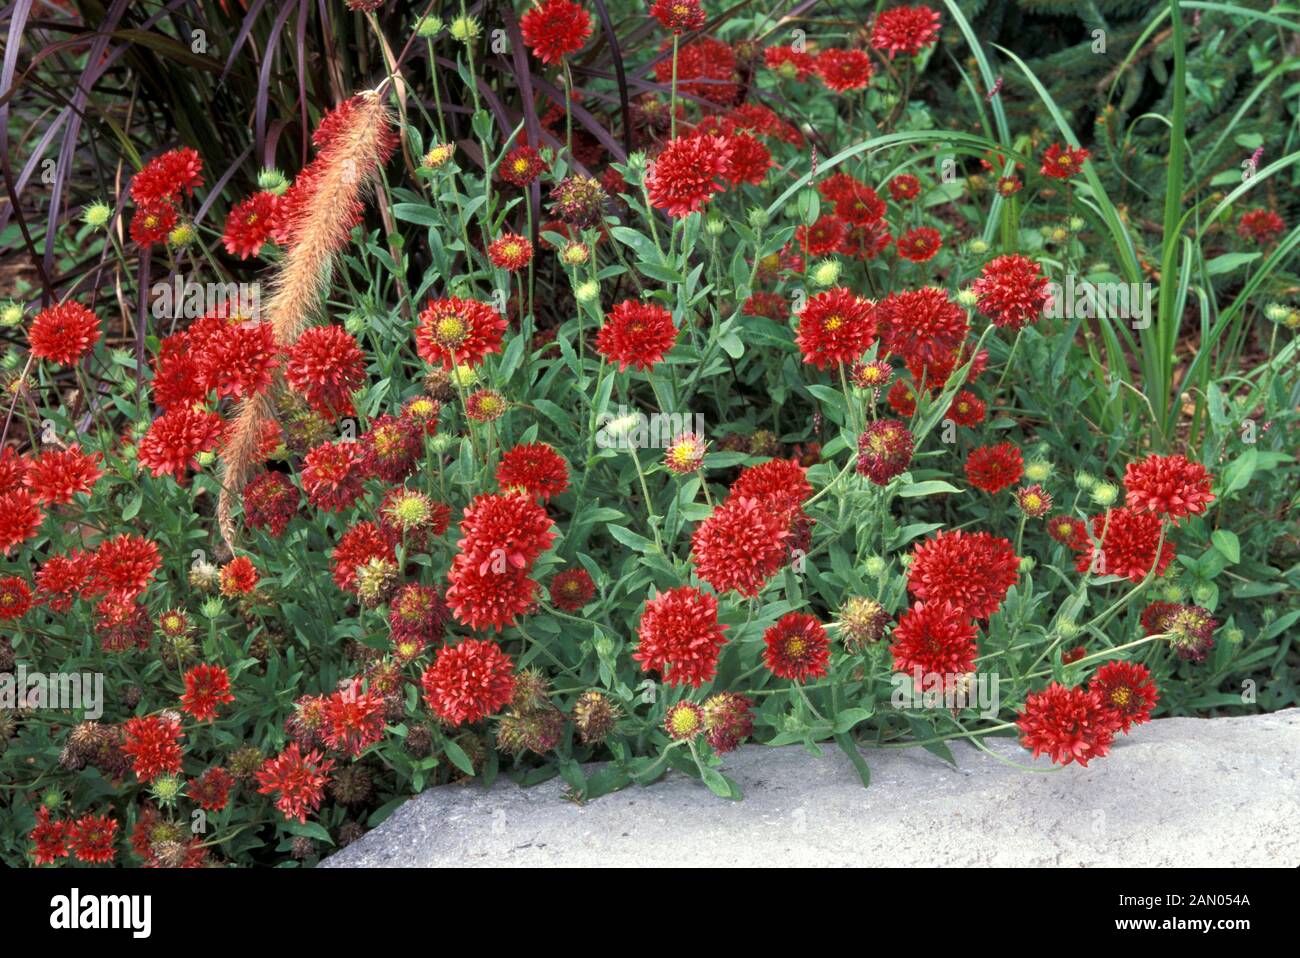 GAILLARDIA PULCHELLA RED PLUME A MASS OF RED FLOWERHEADS WITH MIXED GRASSES  Stock Photo - Alamy